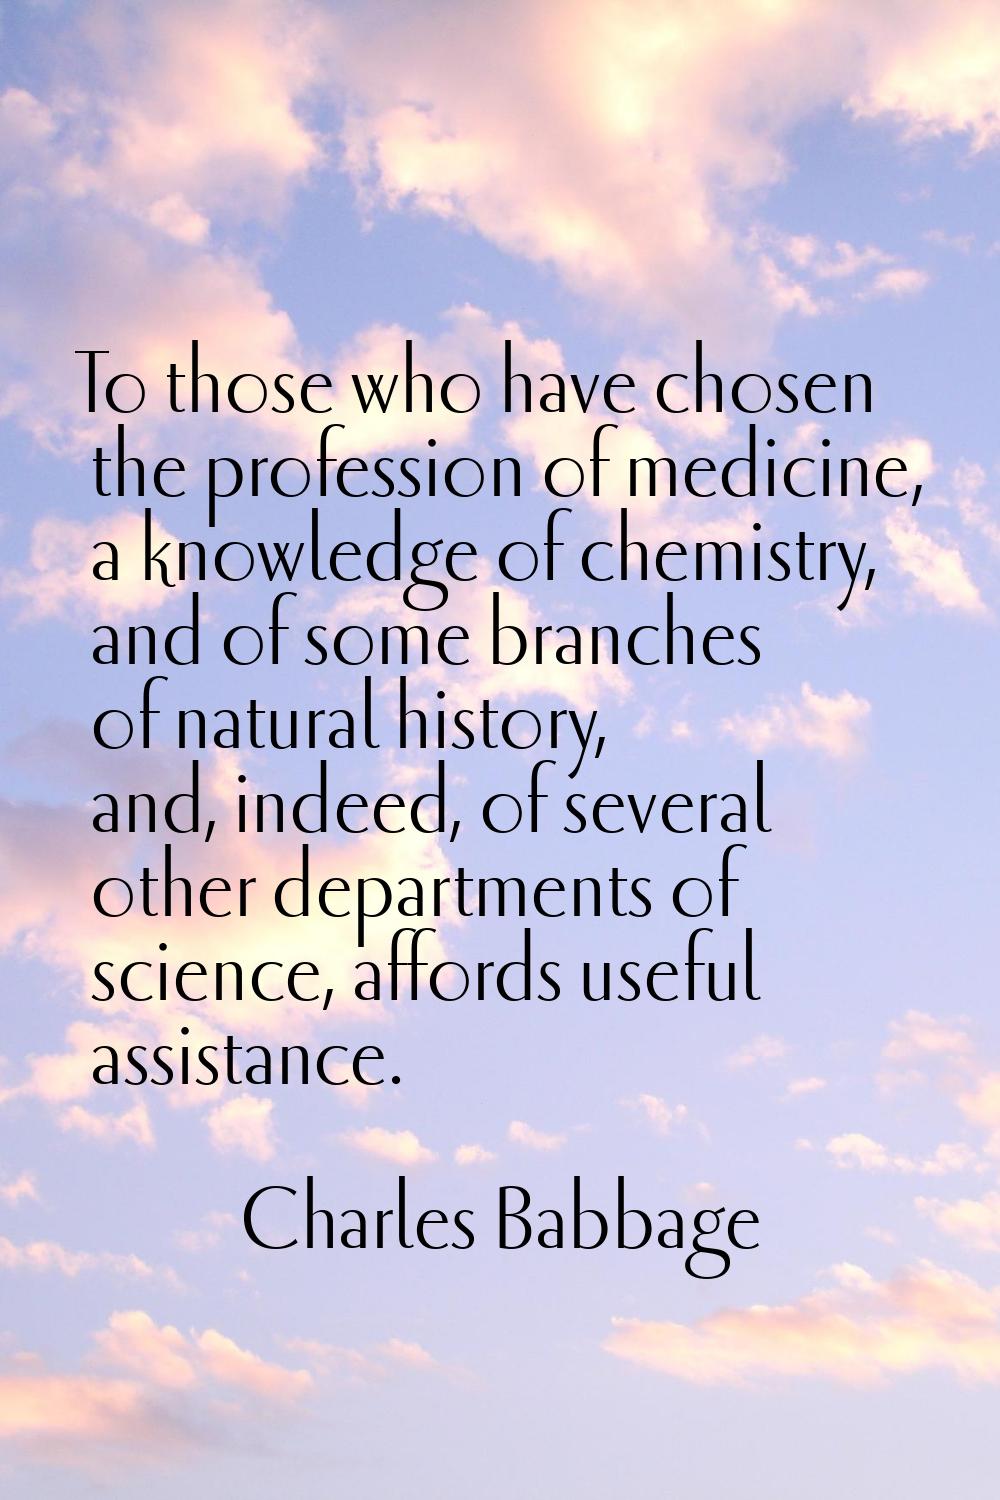 To those who have chosen the profession of medicine, a knowledge of chemistry, and of some branches